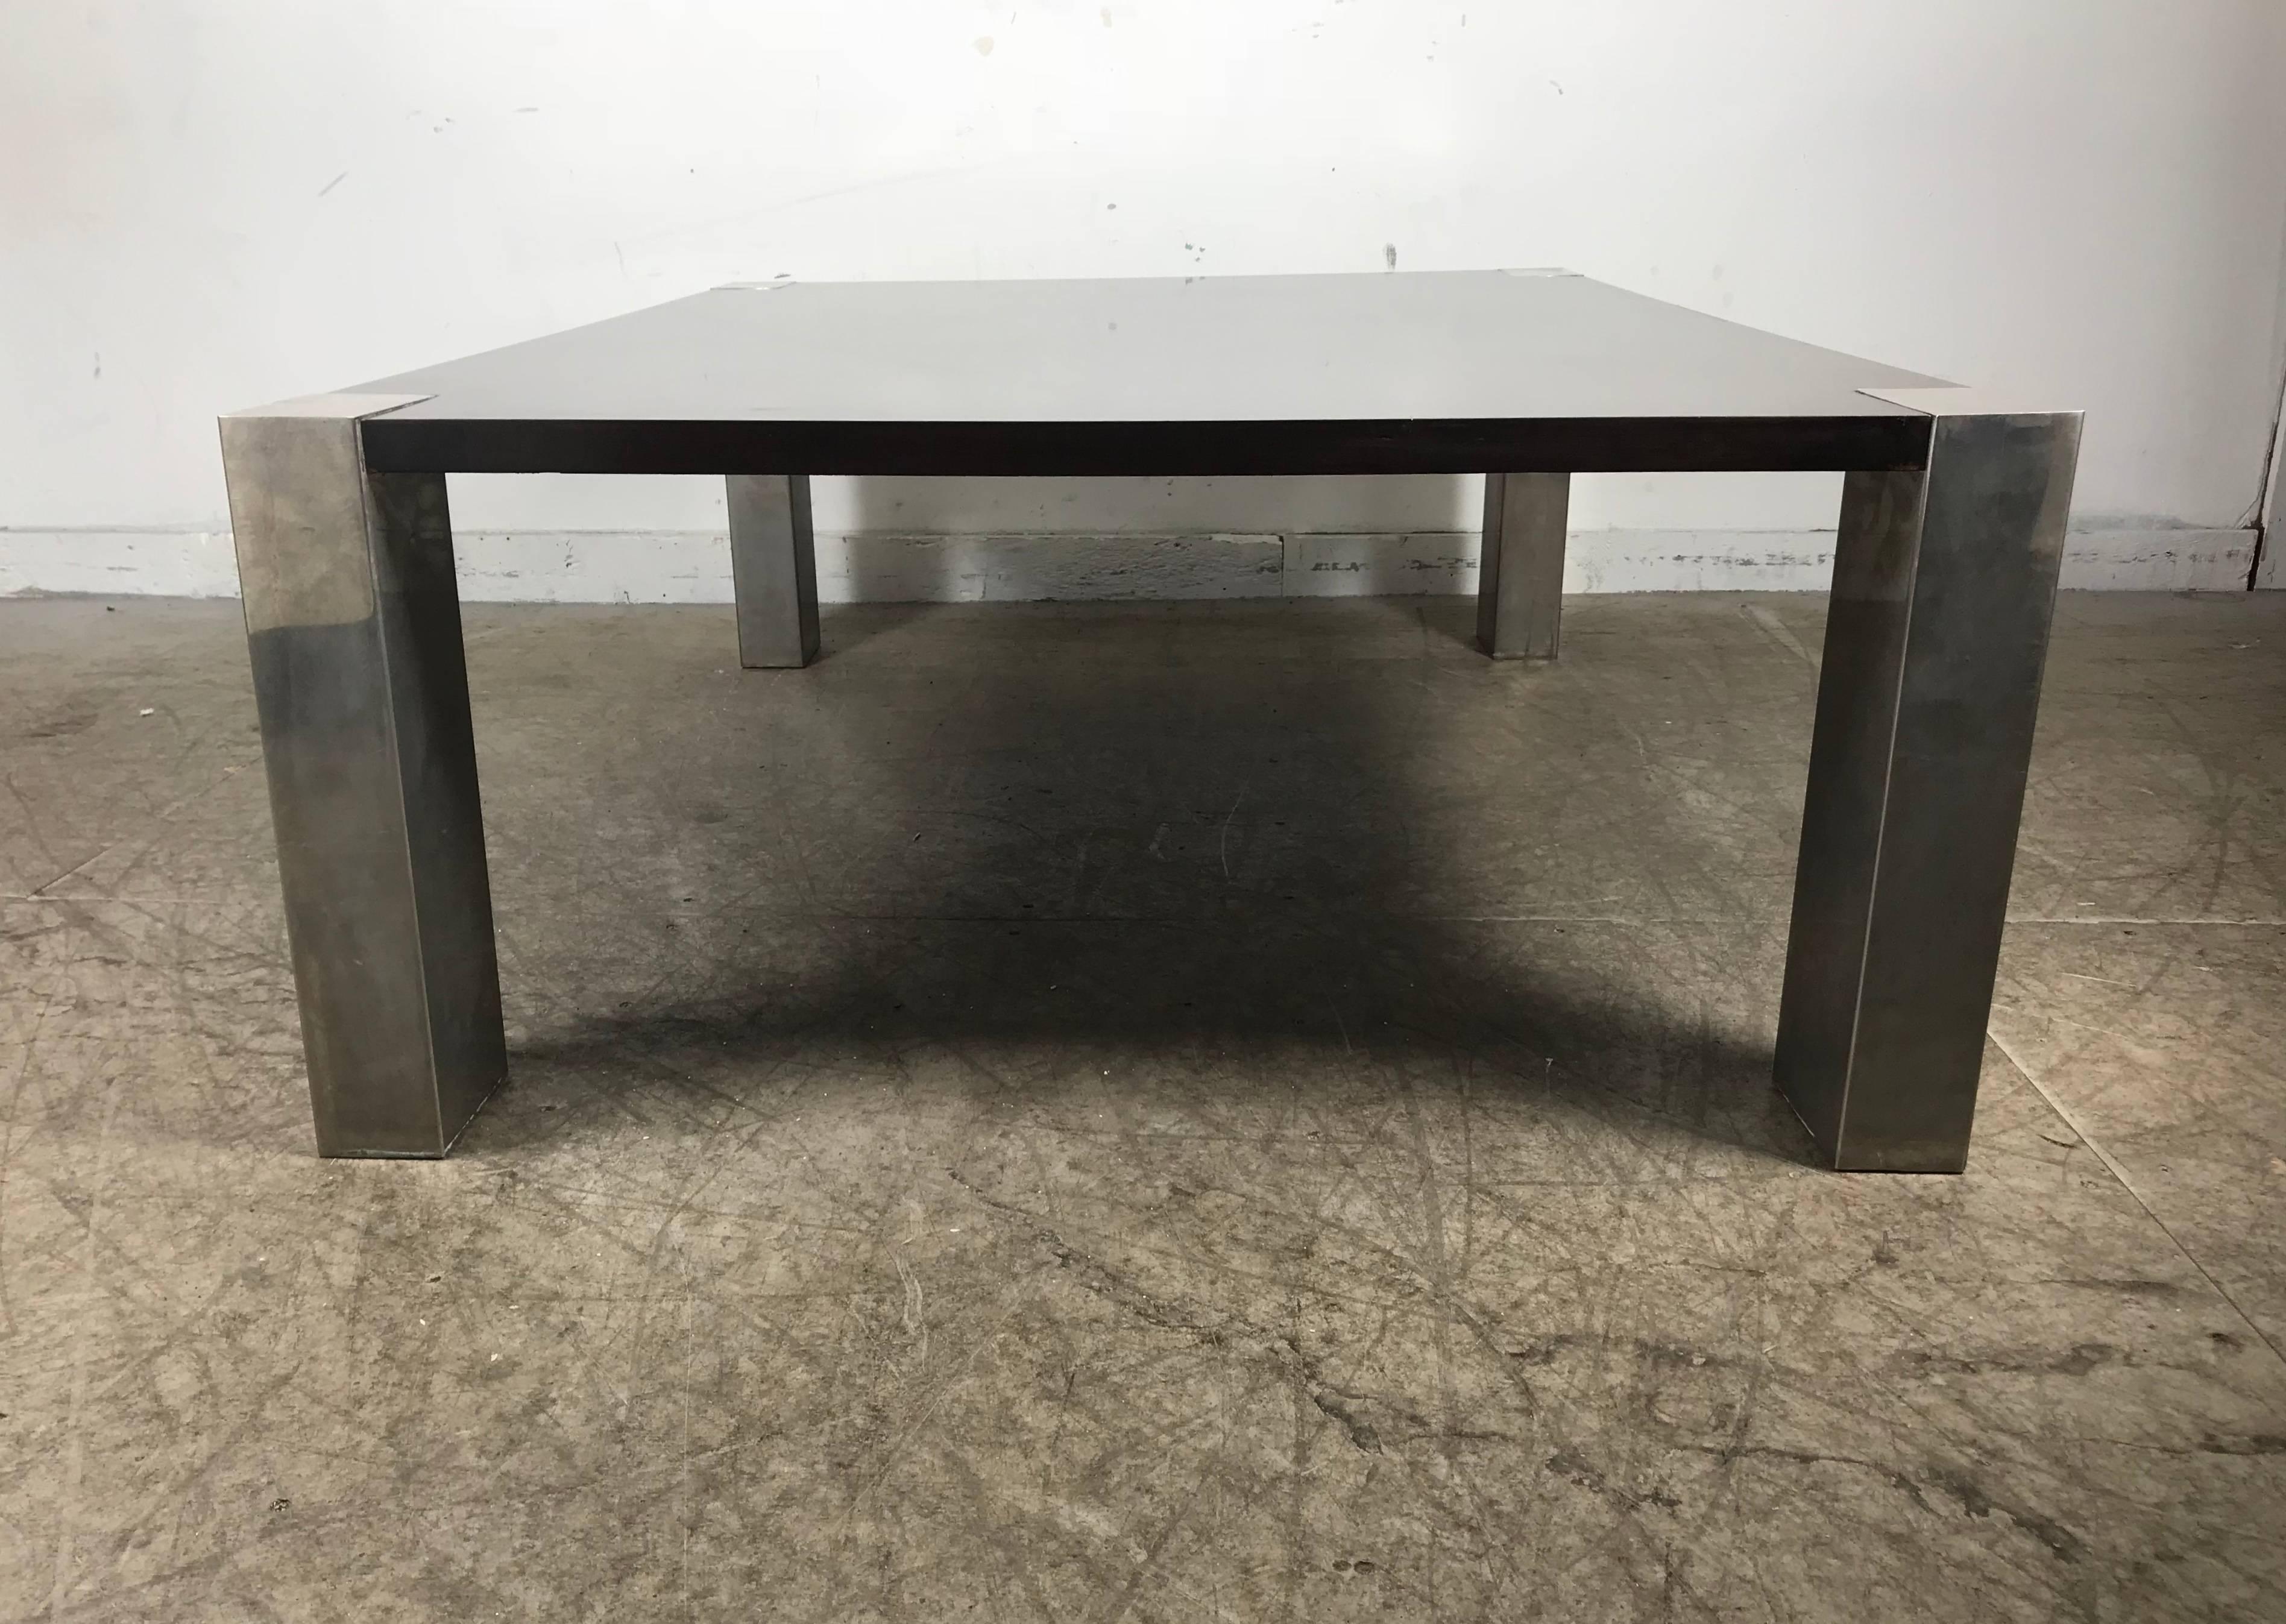 Monumental 1970s stainless steel and wood coffee table, attributed to Pace Collection.